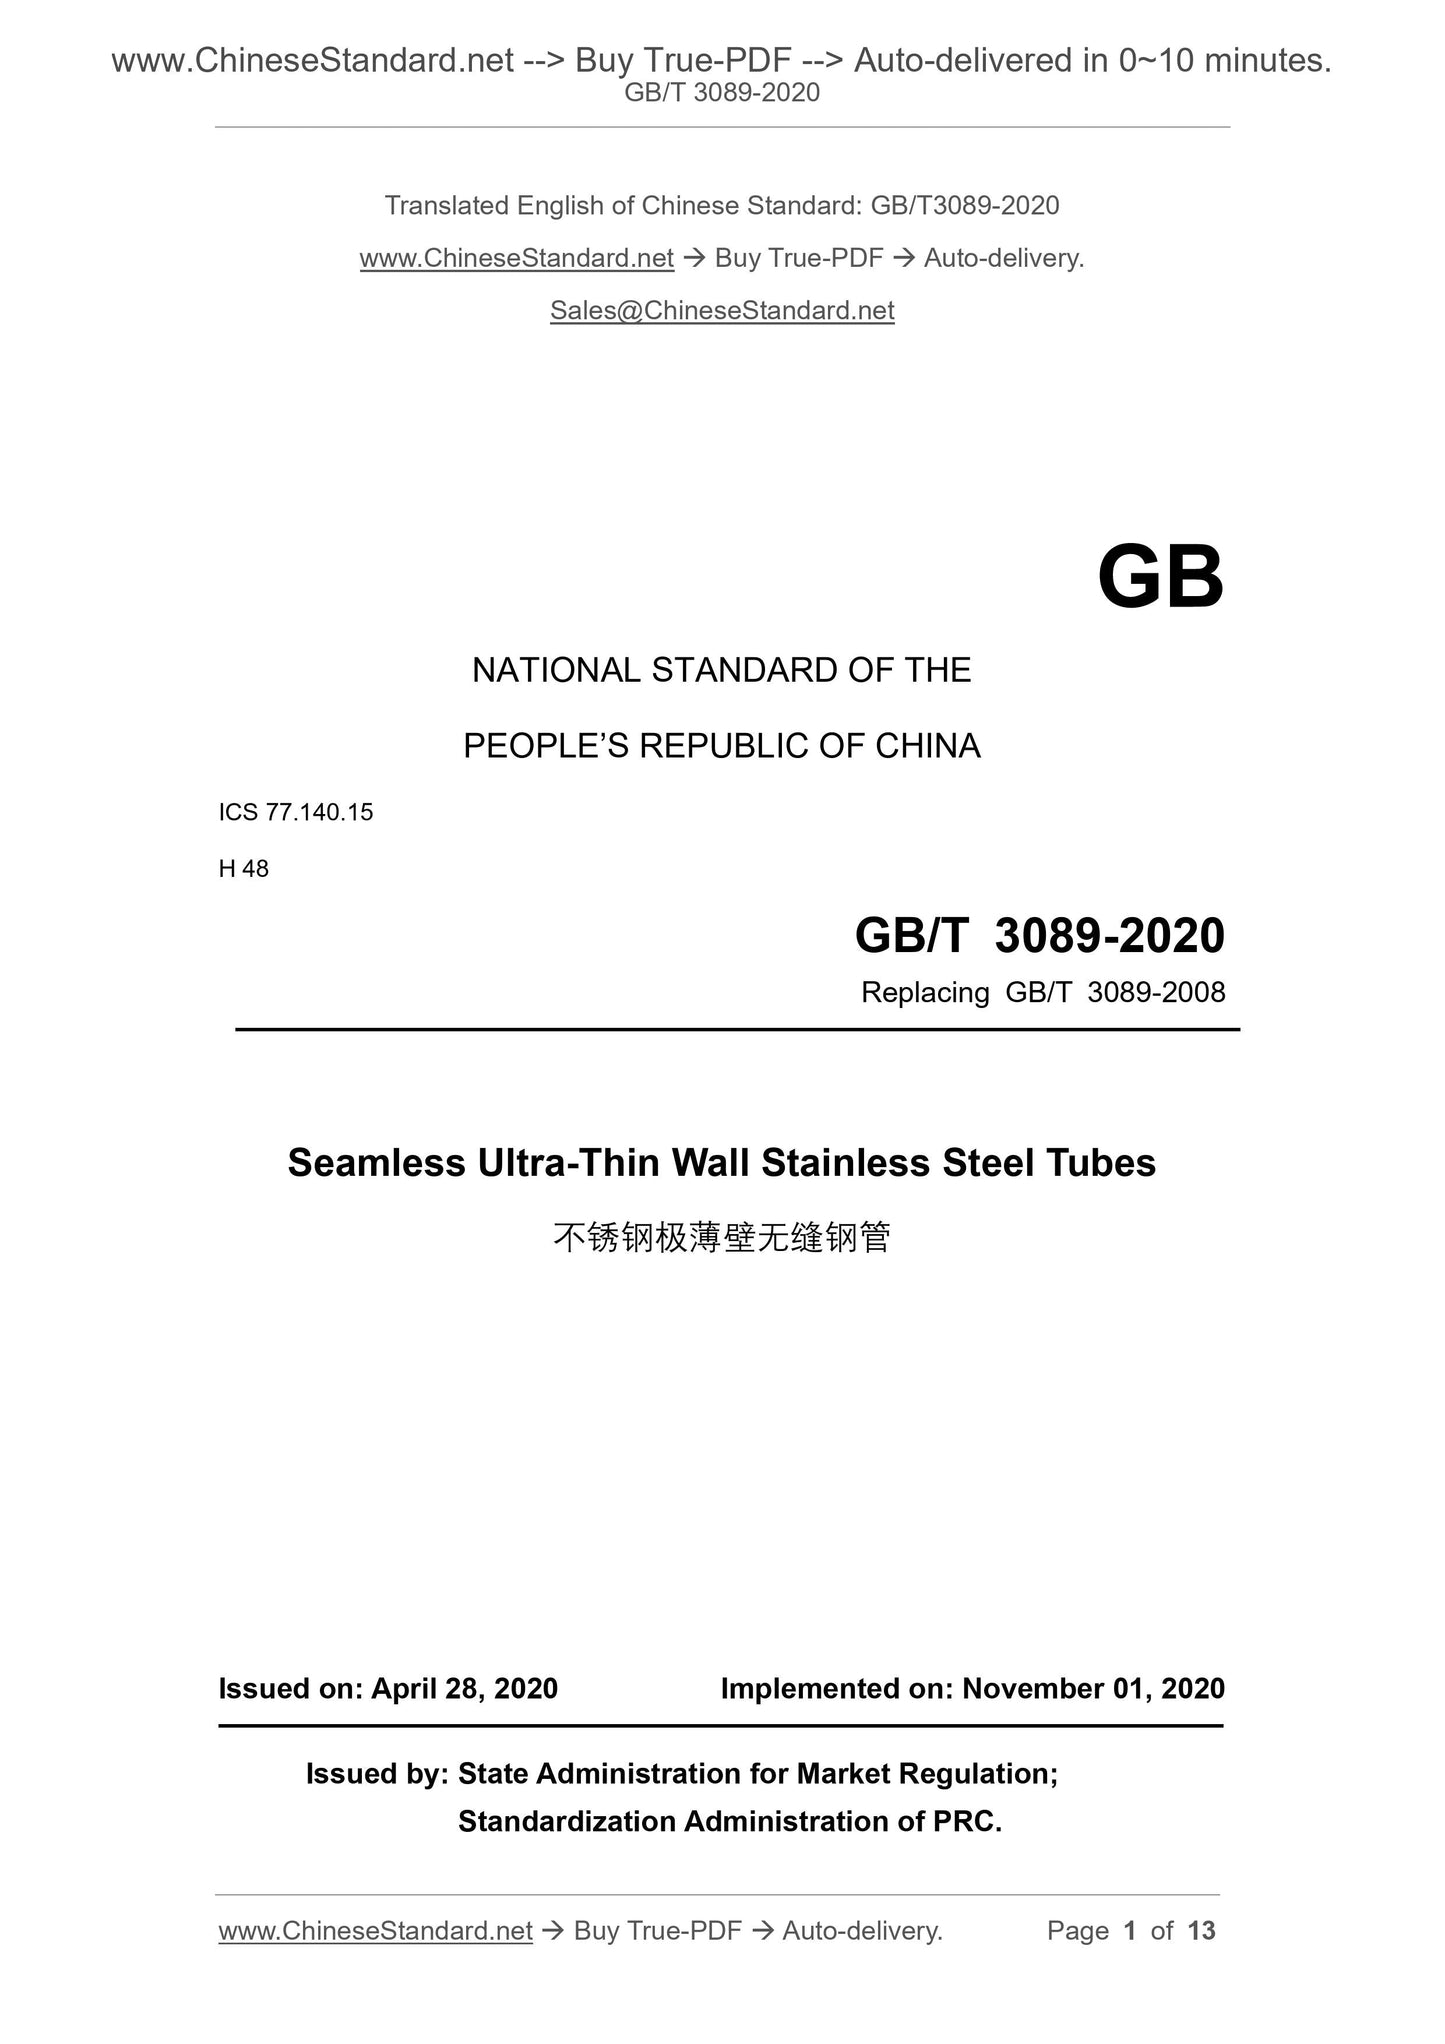 GB/T 3089-2020 Page 1